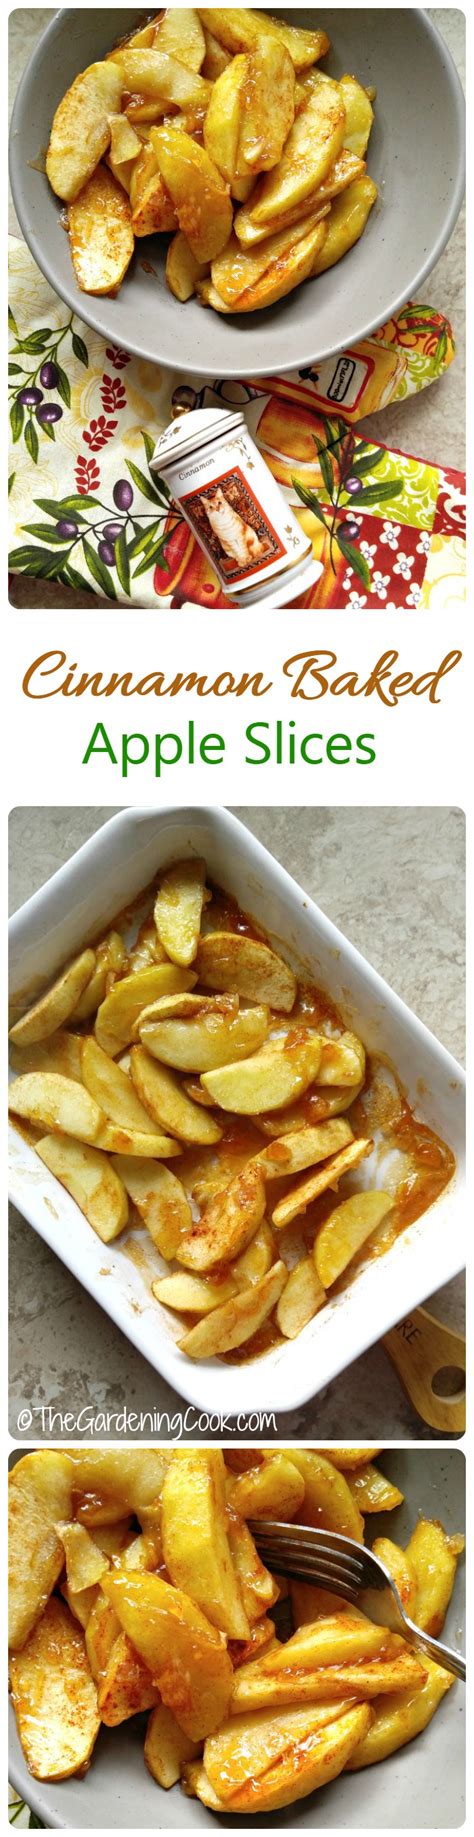 One is baking them such as this baked cinnamon apples. Cinnamon Baked Apple Slices - Warm Cinnamon Apples